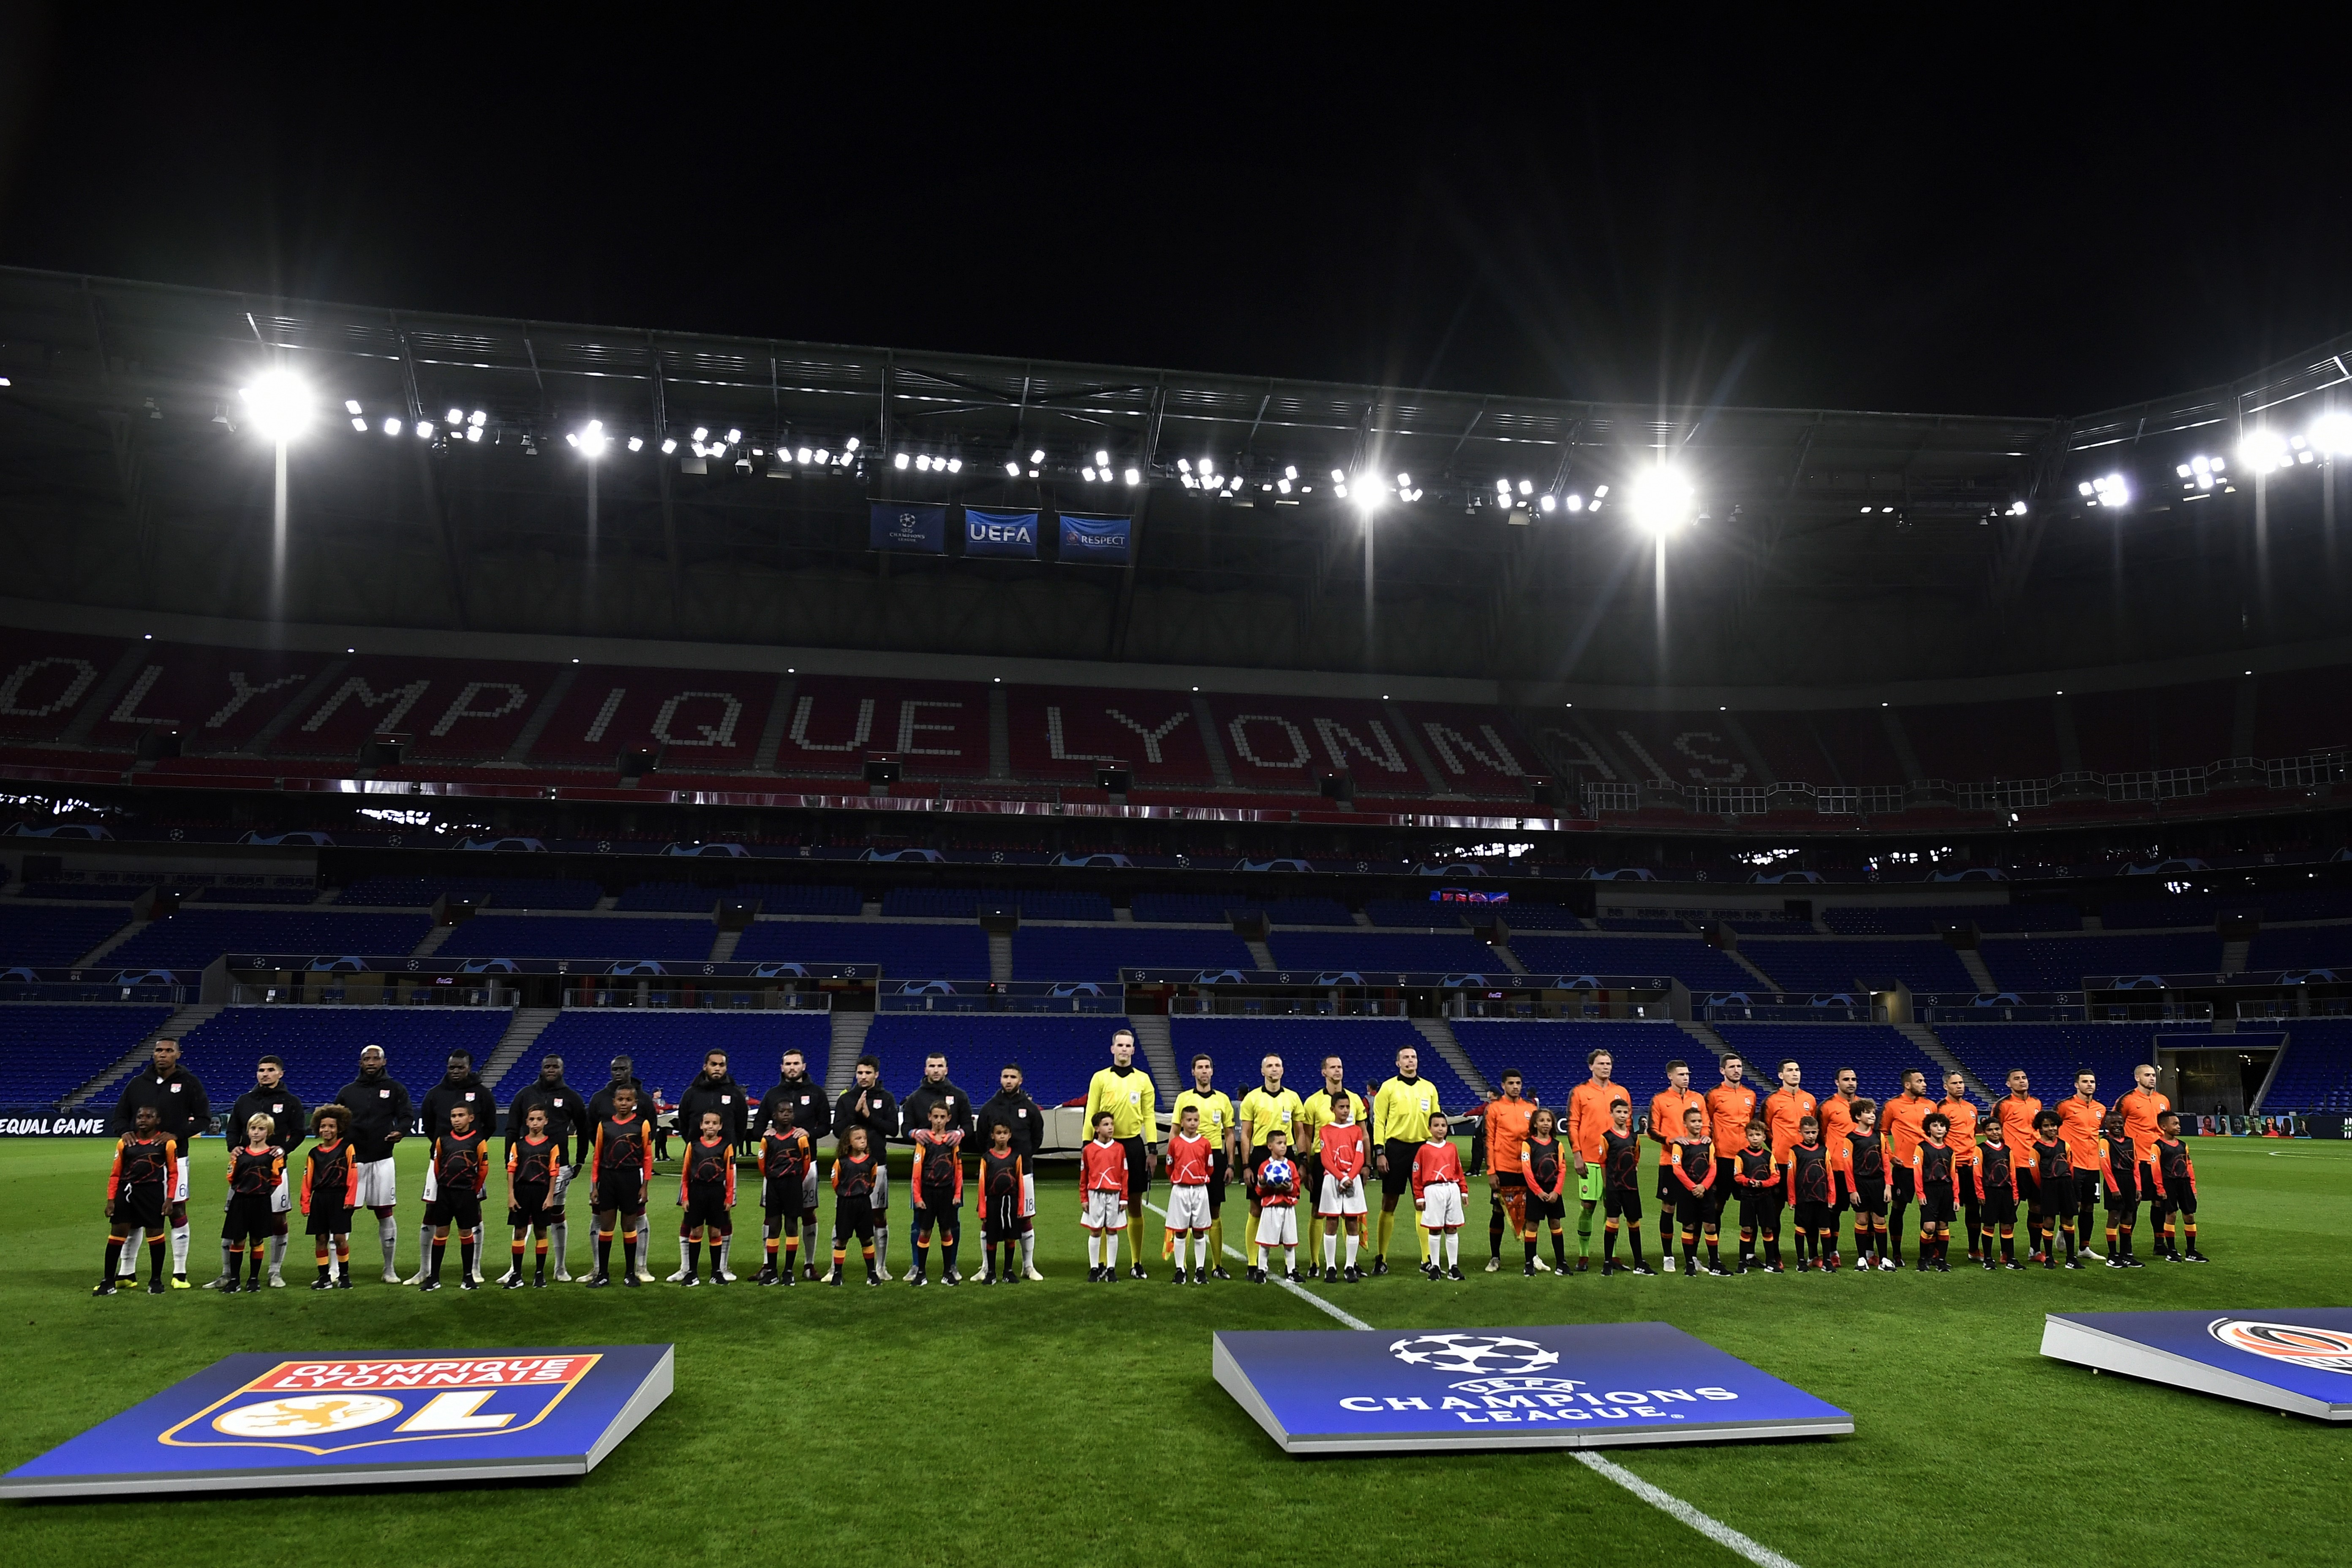 Lyon (L) and Shakthar Donetsk teams pose in an empty stadium before their UEFA Champions League Group F football match Olympique Lyonnais vs FC Shakhtar Donetsk at the OL stadium in Decines-Charpieu on October 2, 2018. - Lyon was ordered by UEFA to play its first Champions League group-stage home game without public as a punishment for racism and crowd disorder in last season's Europa League. (Photo by JEFF PACHOUD / AFP)        (Photo credit should read JEFF PACHOUD/AFP/Getty Images)